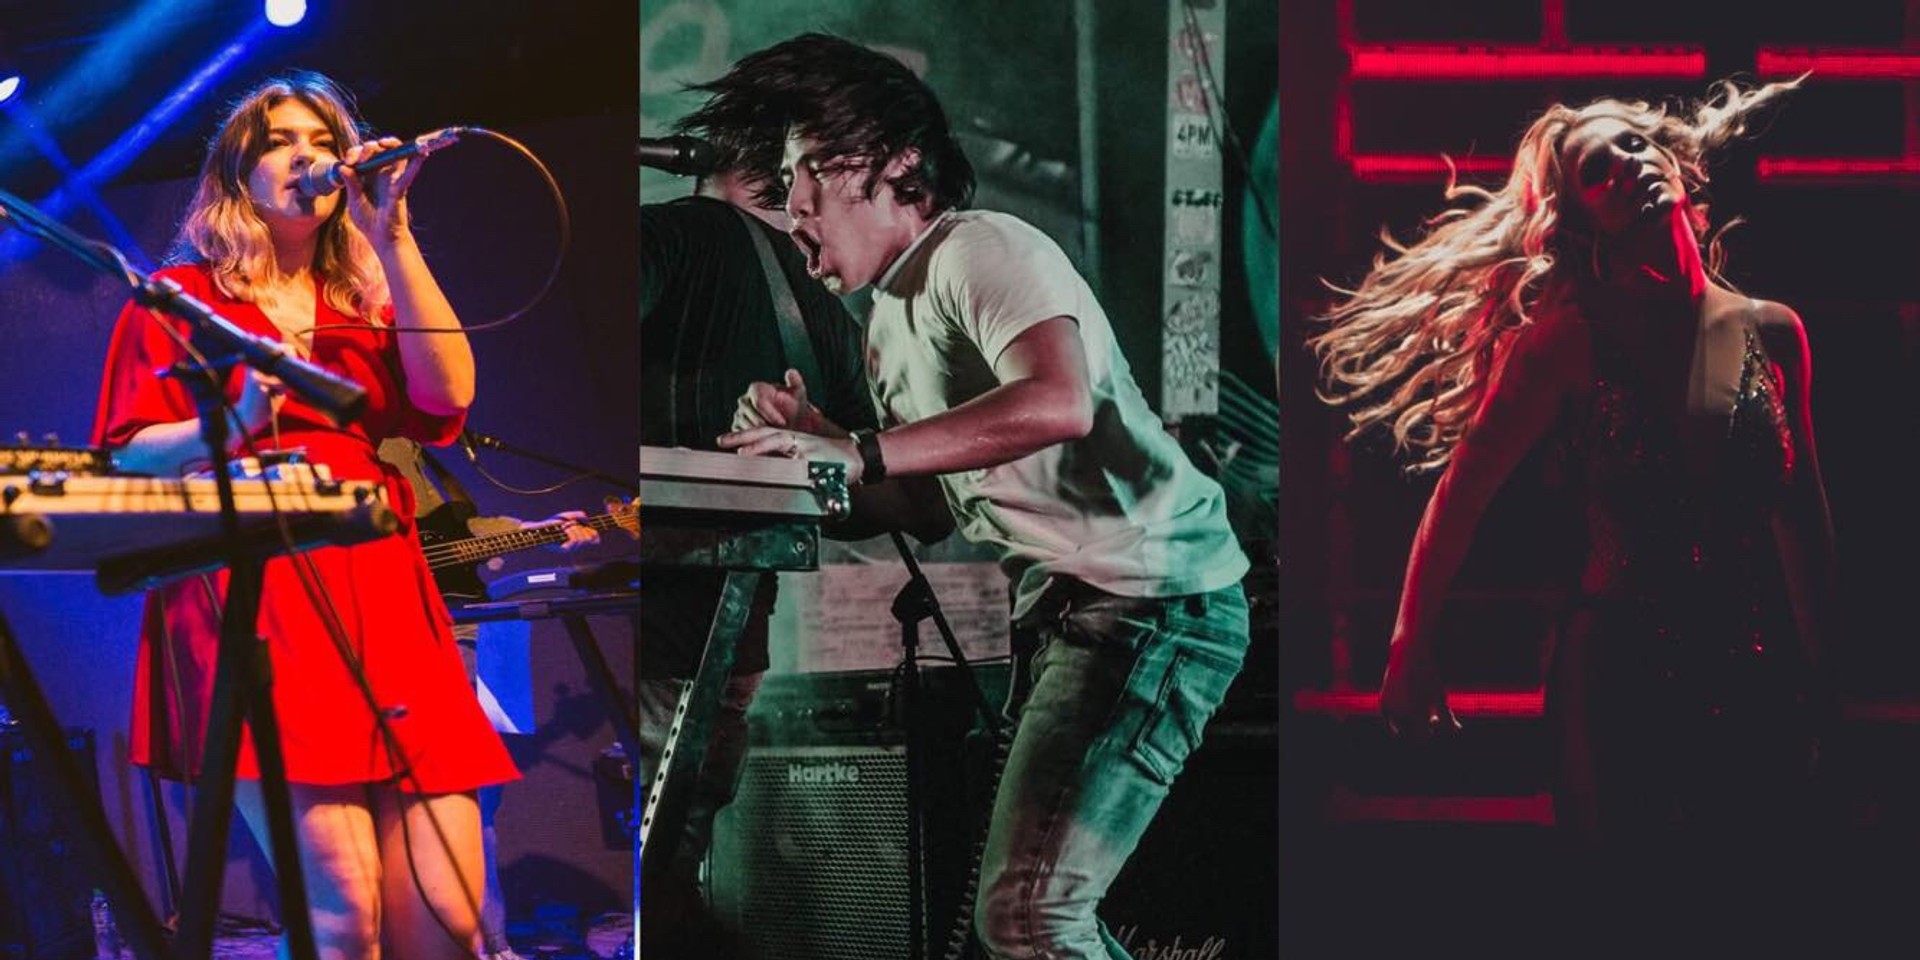 2017's Best Music Moments as chosen by live music photographers